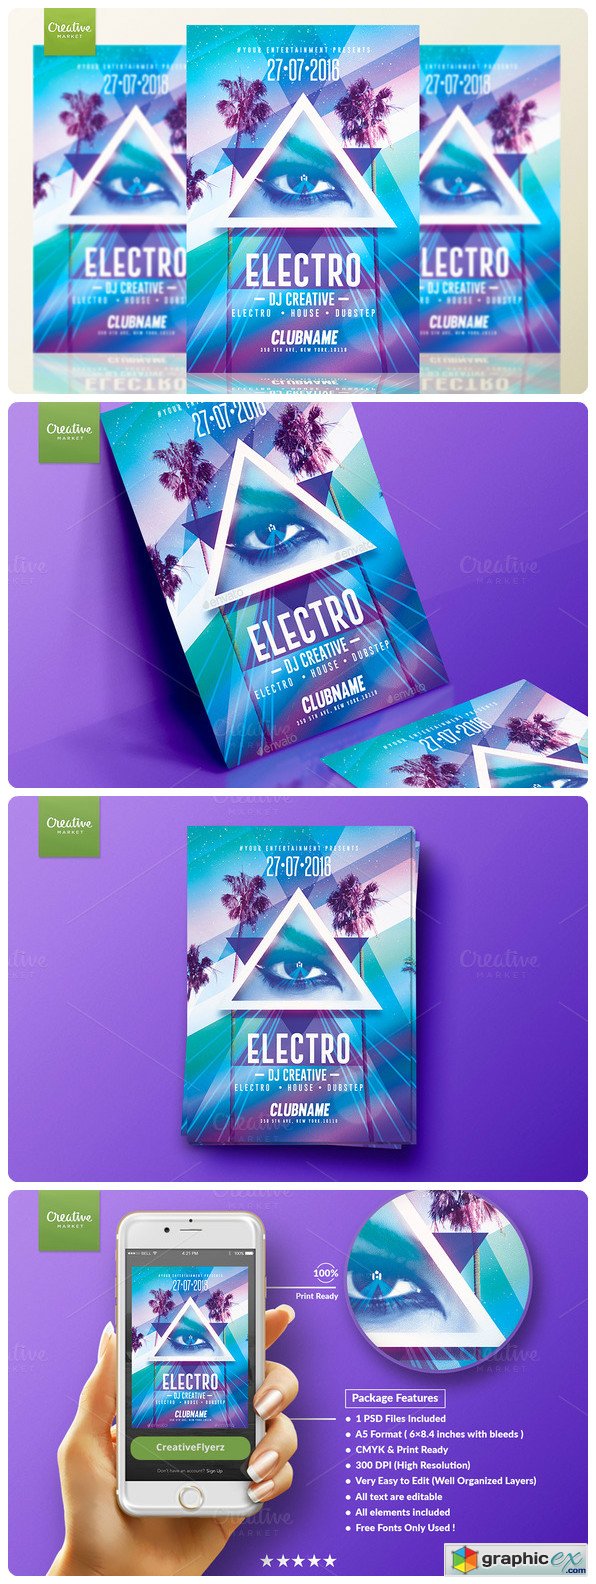 Electro Party Psd Flyer Template 678758